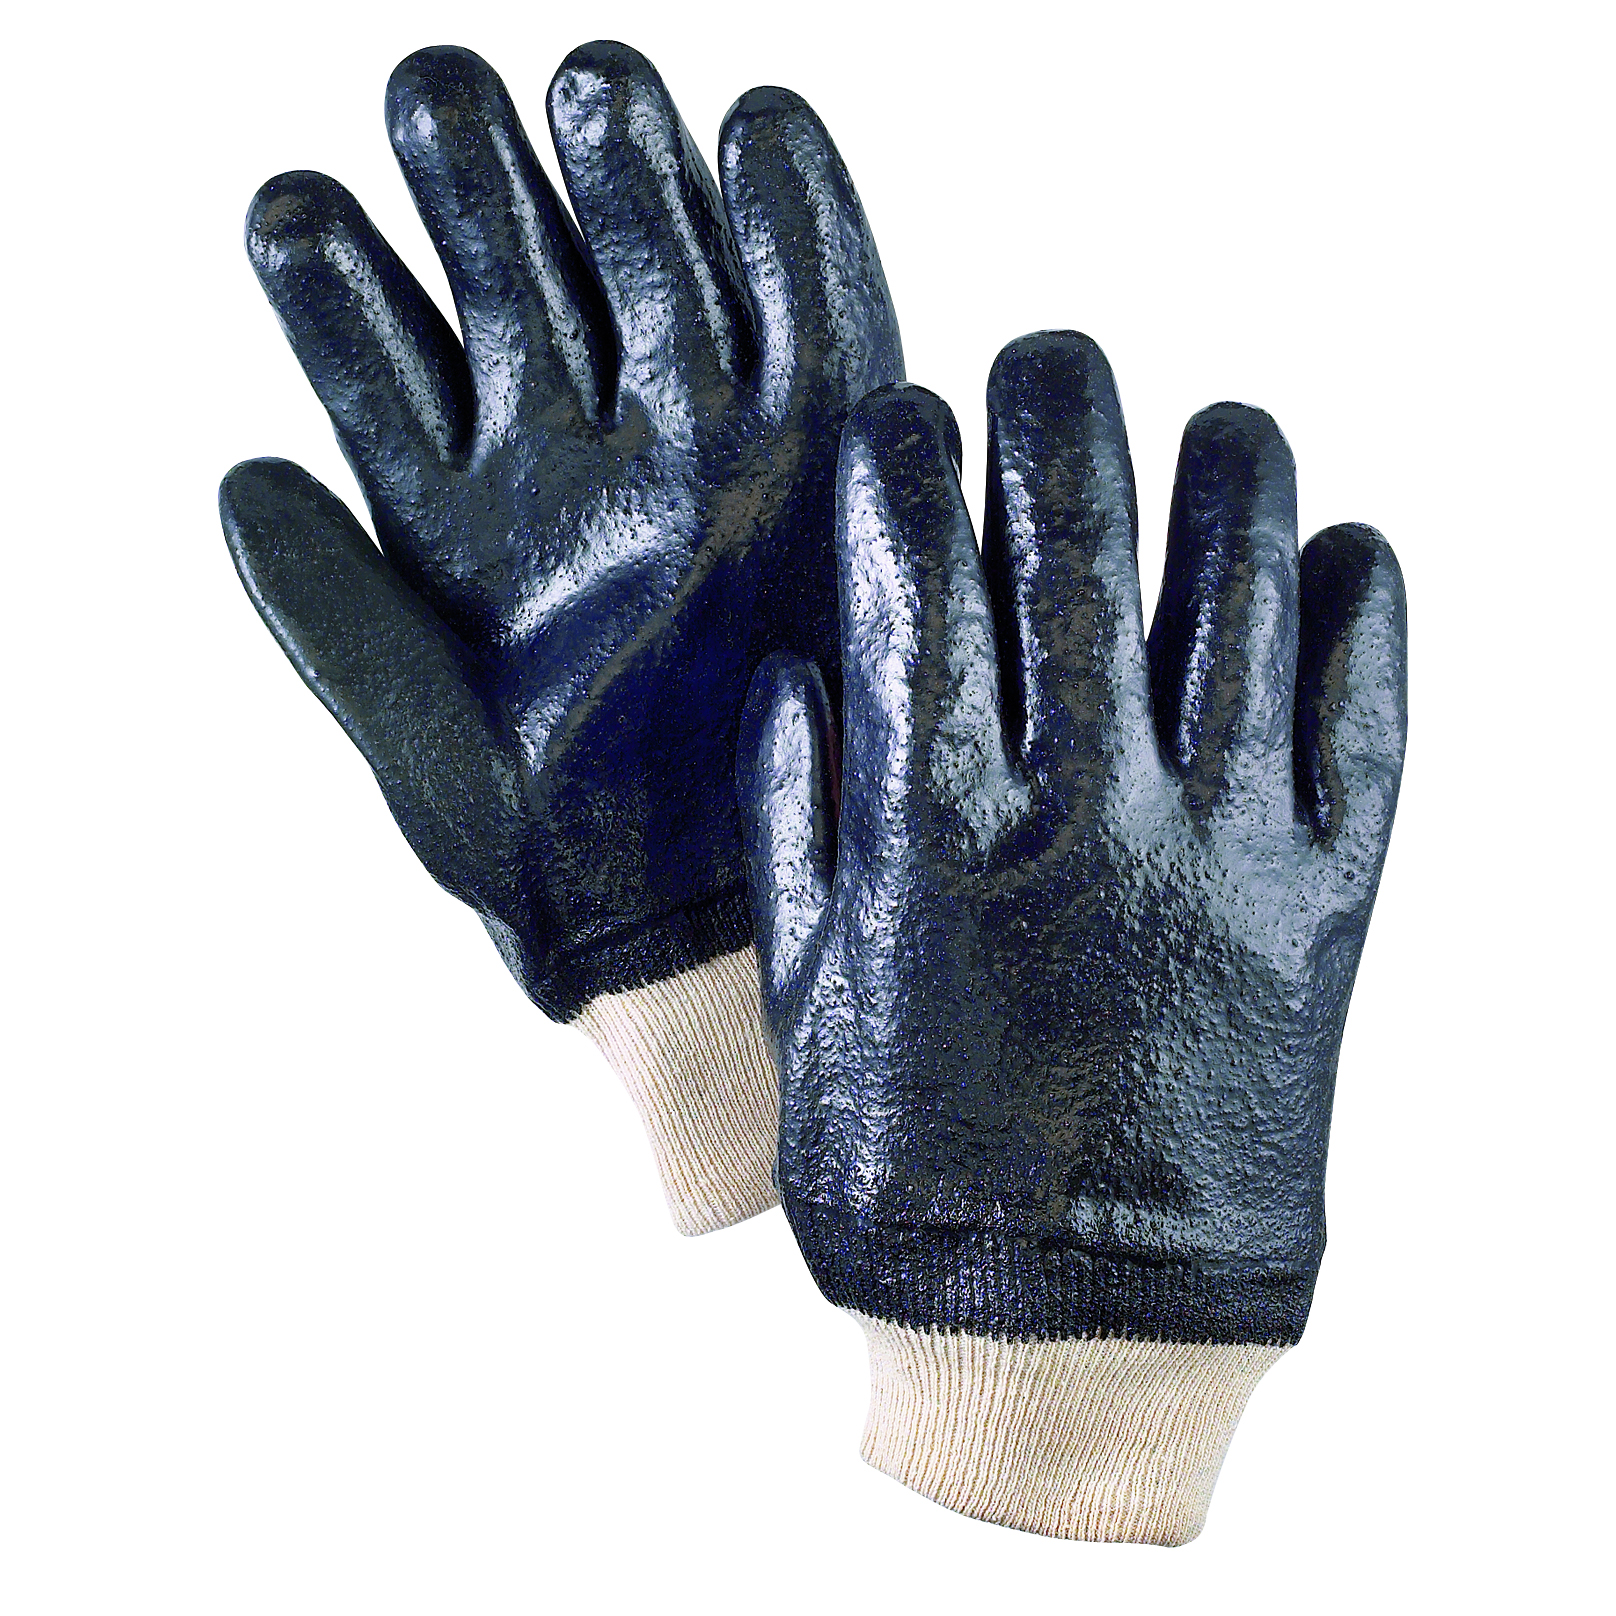 PVC Gloves with Rough Finish, Knit Wrist